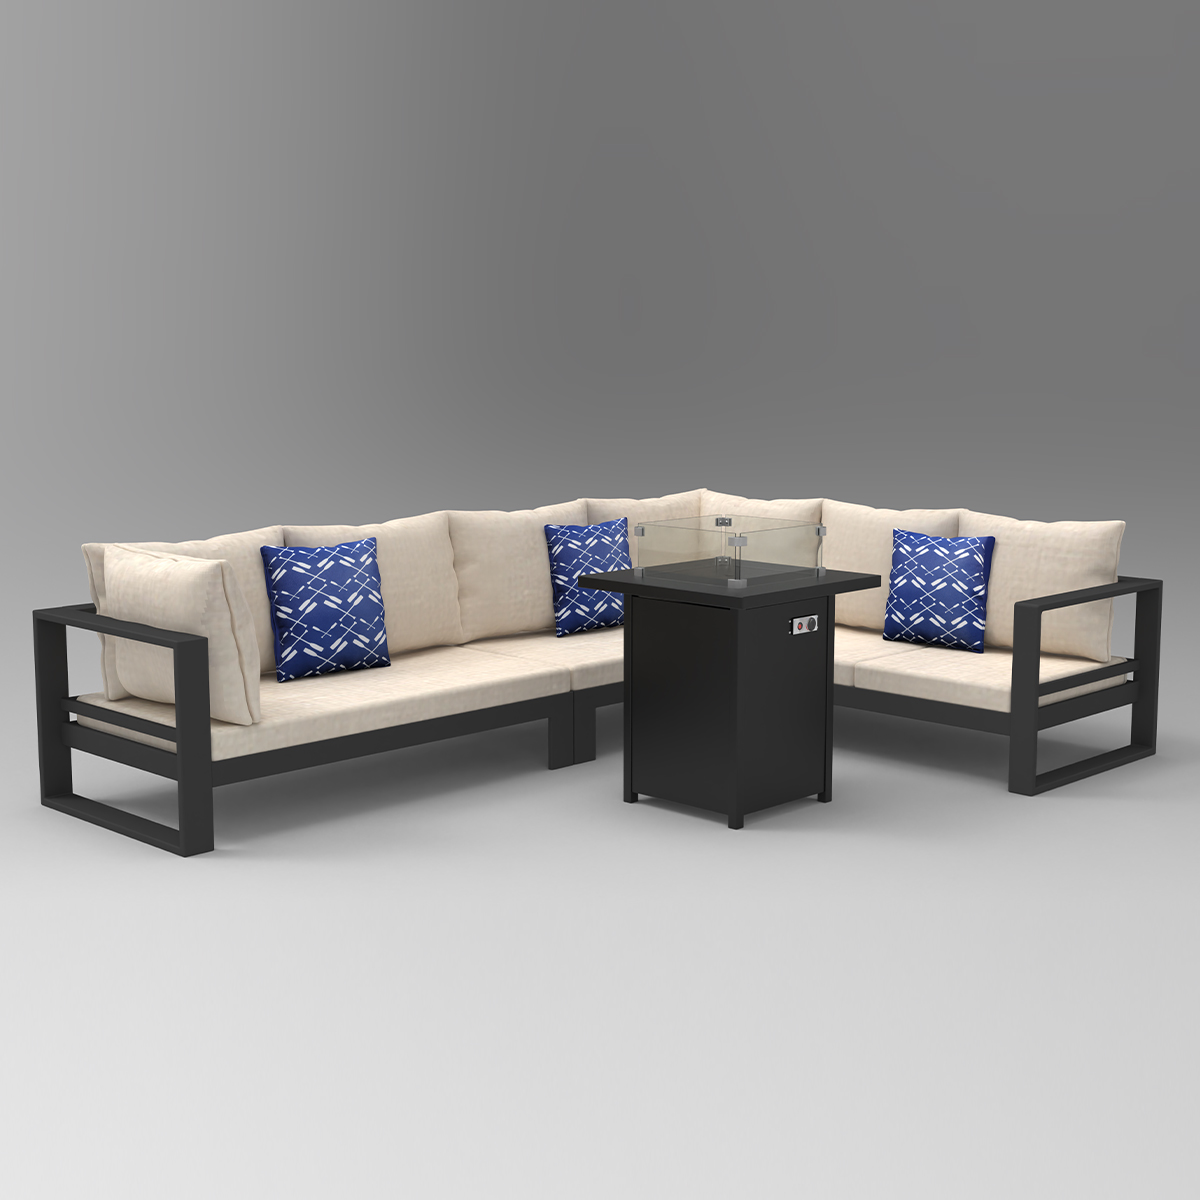 L-Shaped Sofa With Gas Fire Pit Table 